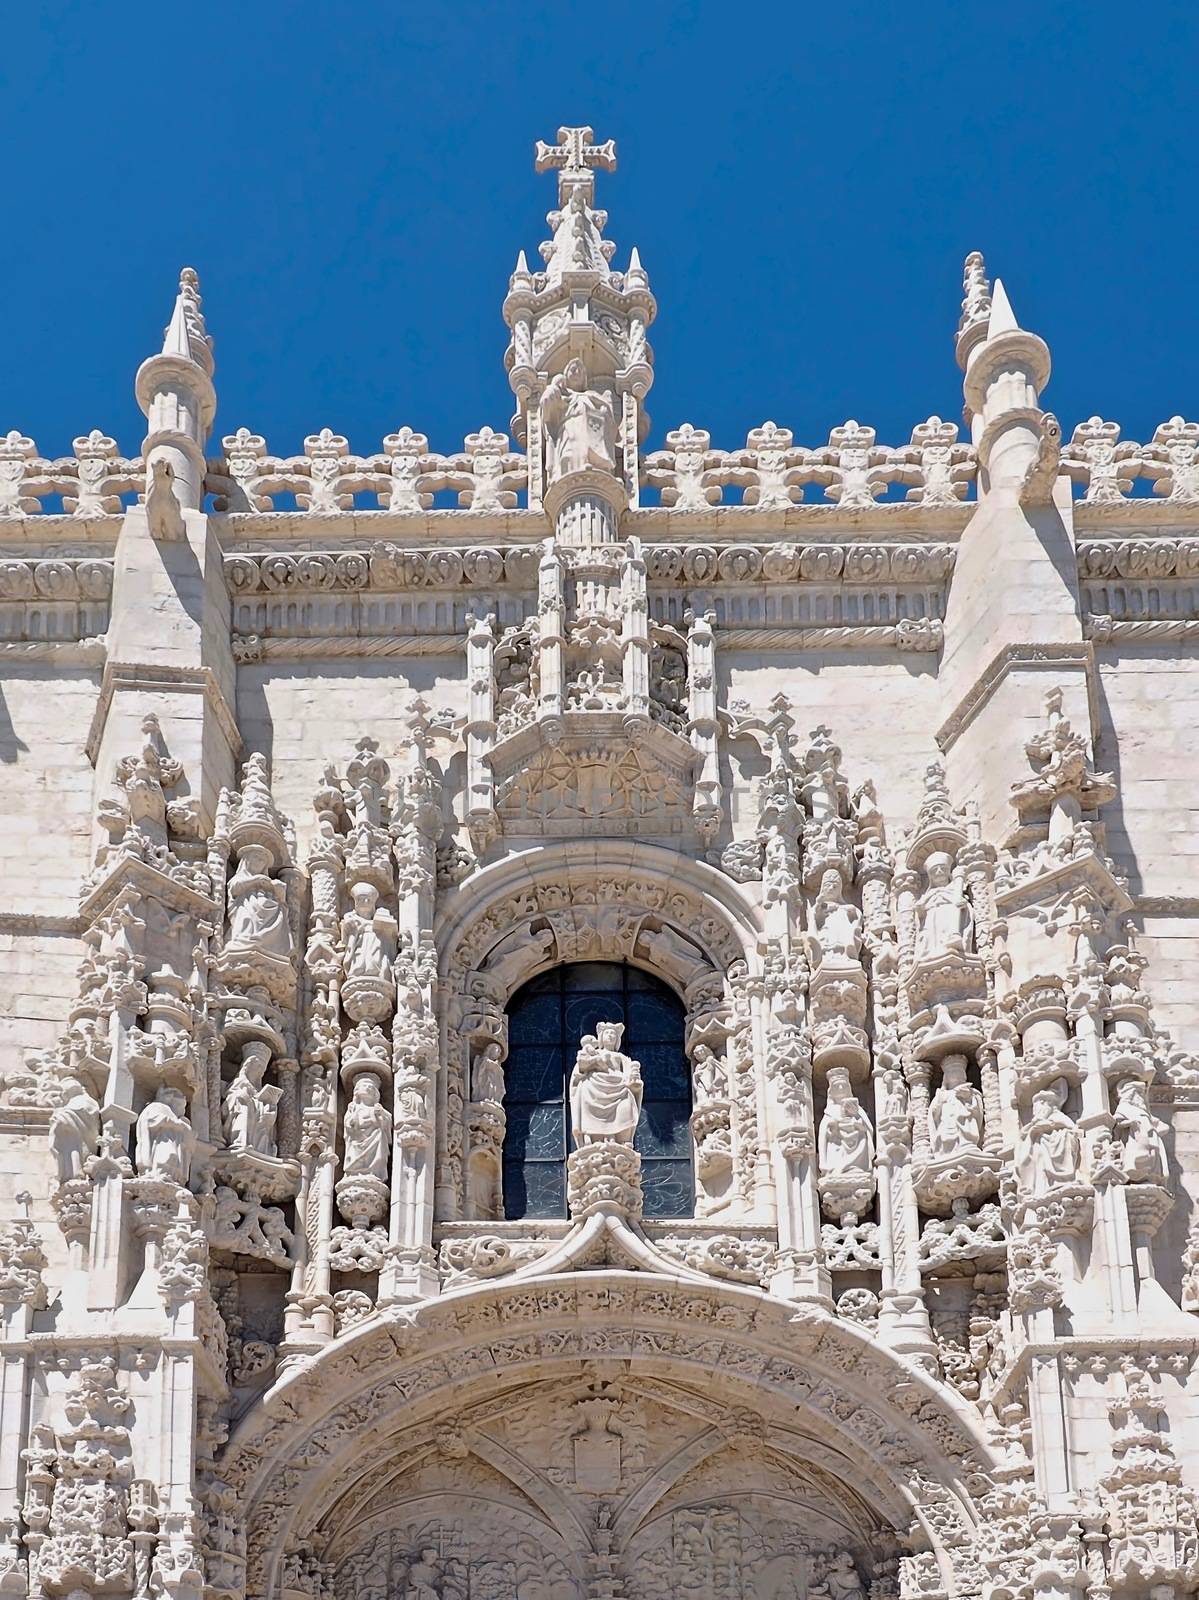 Mosteiro dos Jeronimos in Belem in Lisbon, historic monastery in Portugal that belongs to Unesco world heritage